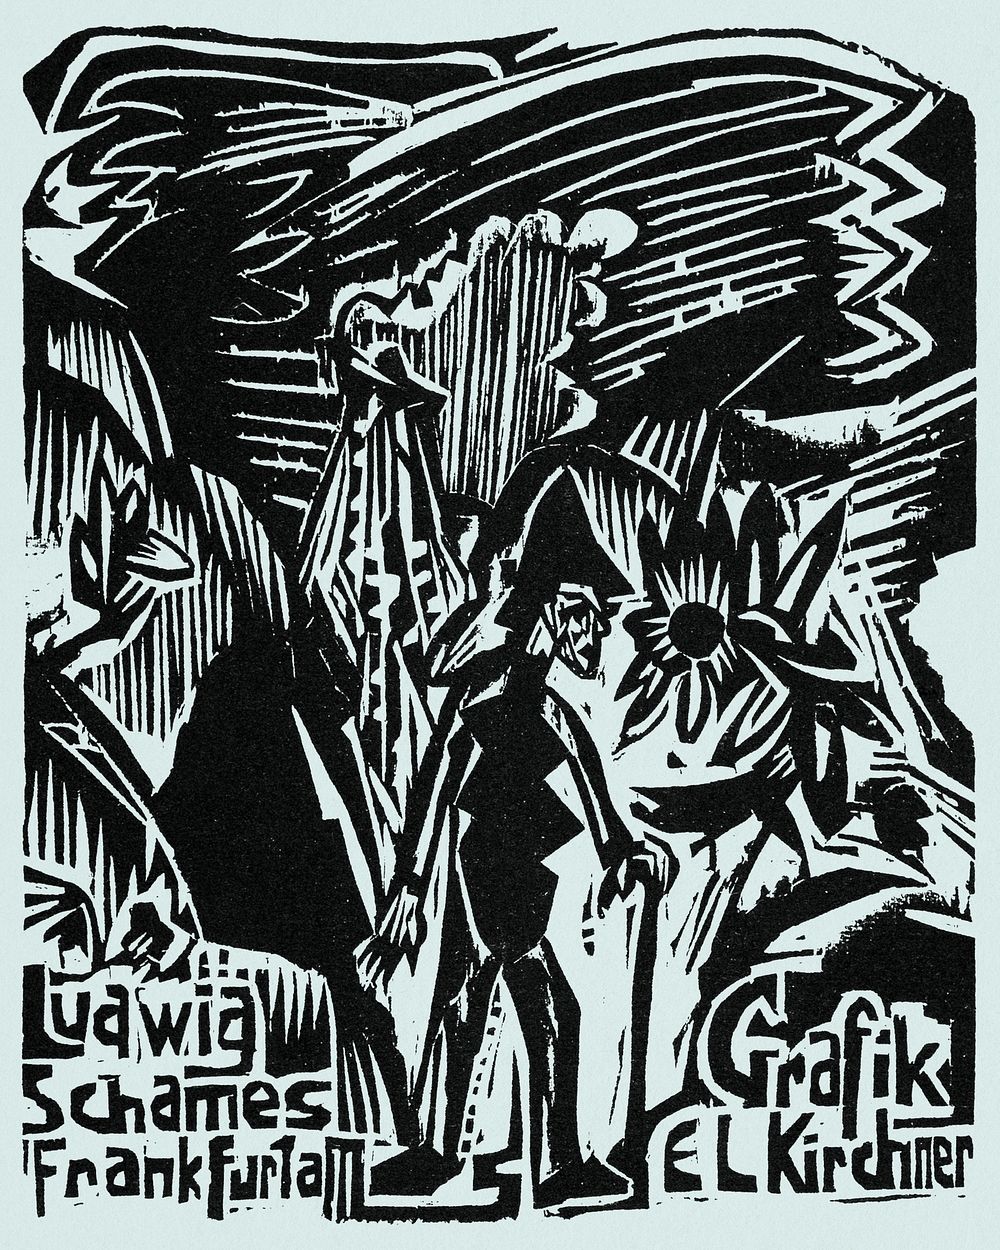 Ludwig Schames, Frankfurt am (1920) print in high resolution by Ernst Ludwig Kirchner. Original from The Los Angeles County…